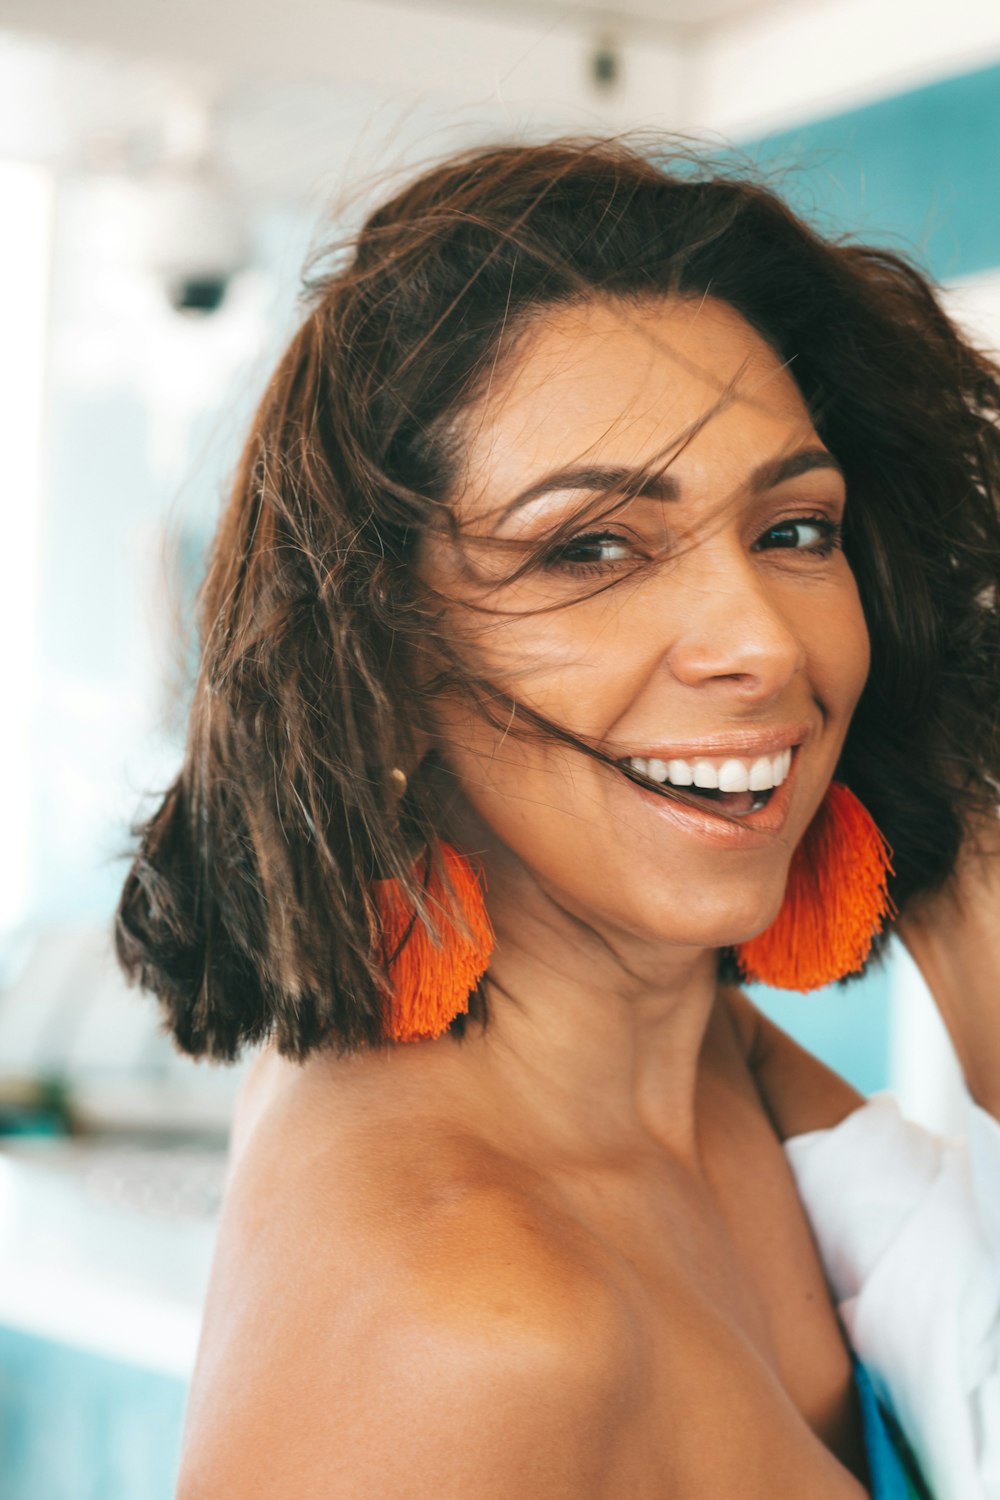 a woman with orange earrings smiling at the camera